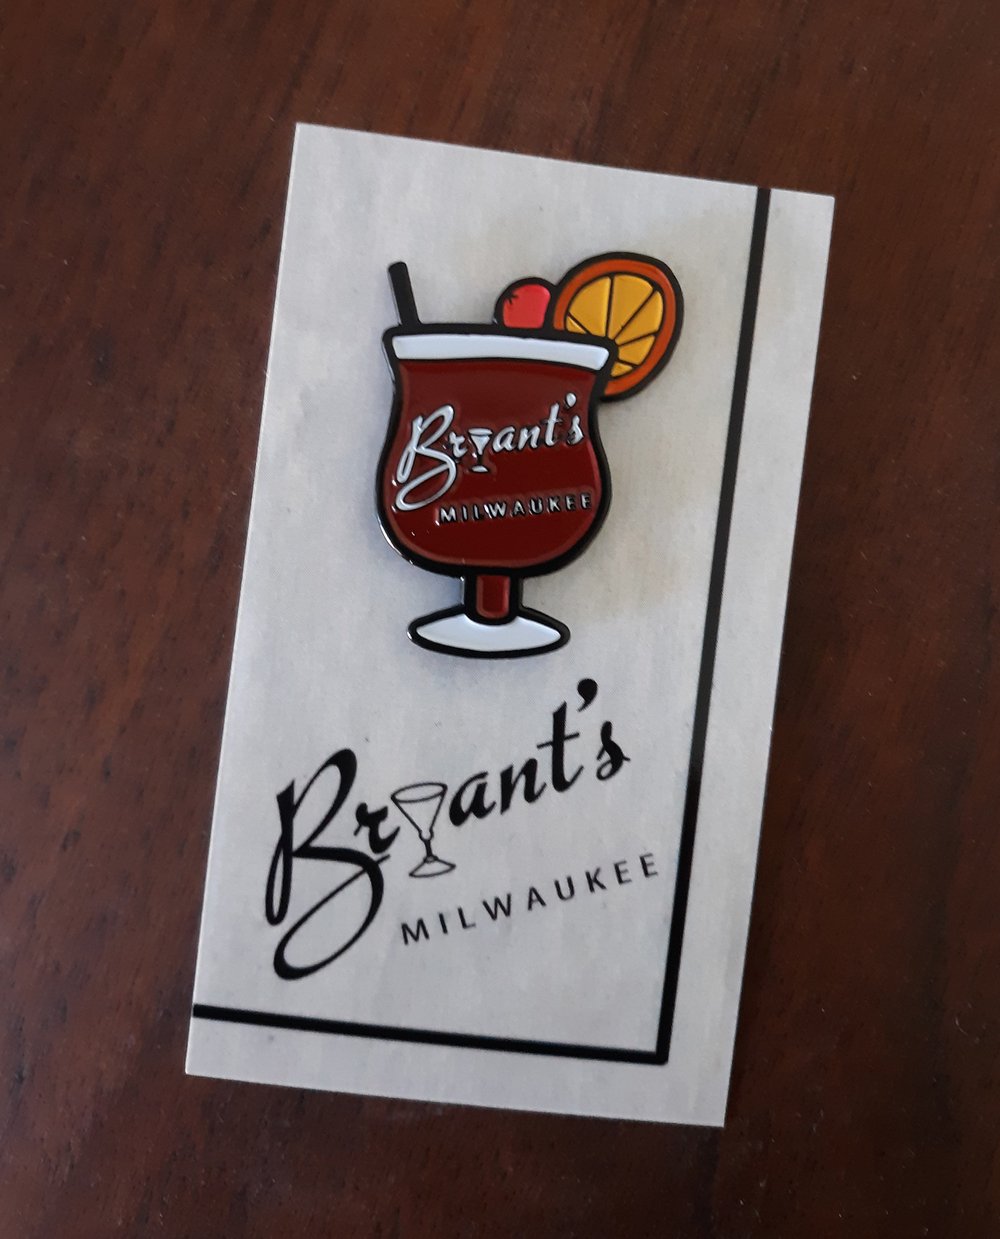 BRYANT'S COCKTAIL LOUNGE Milwaukee 1.5" Old Fashioned Limited Edition Enamel Pin